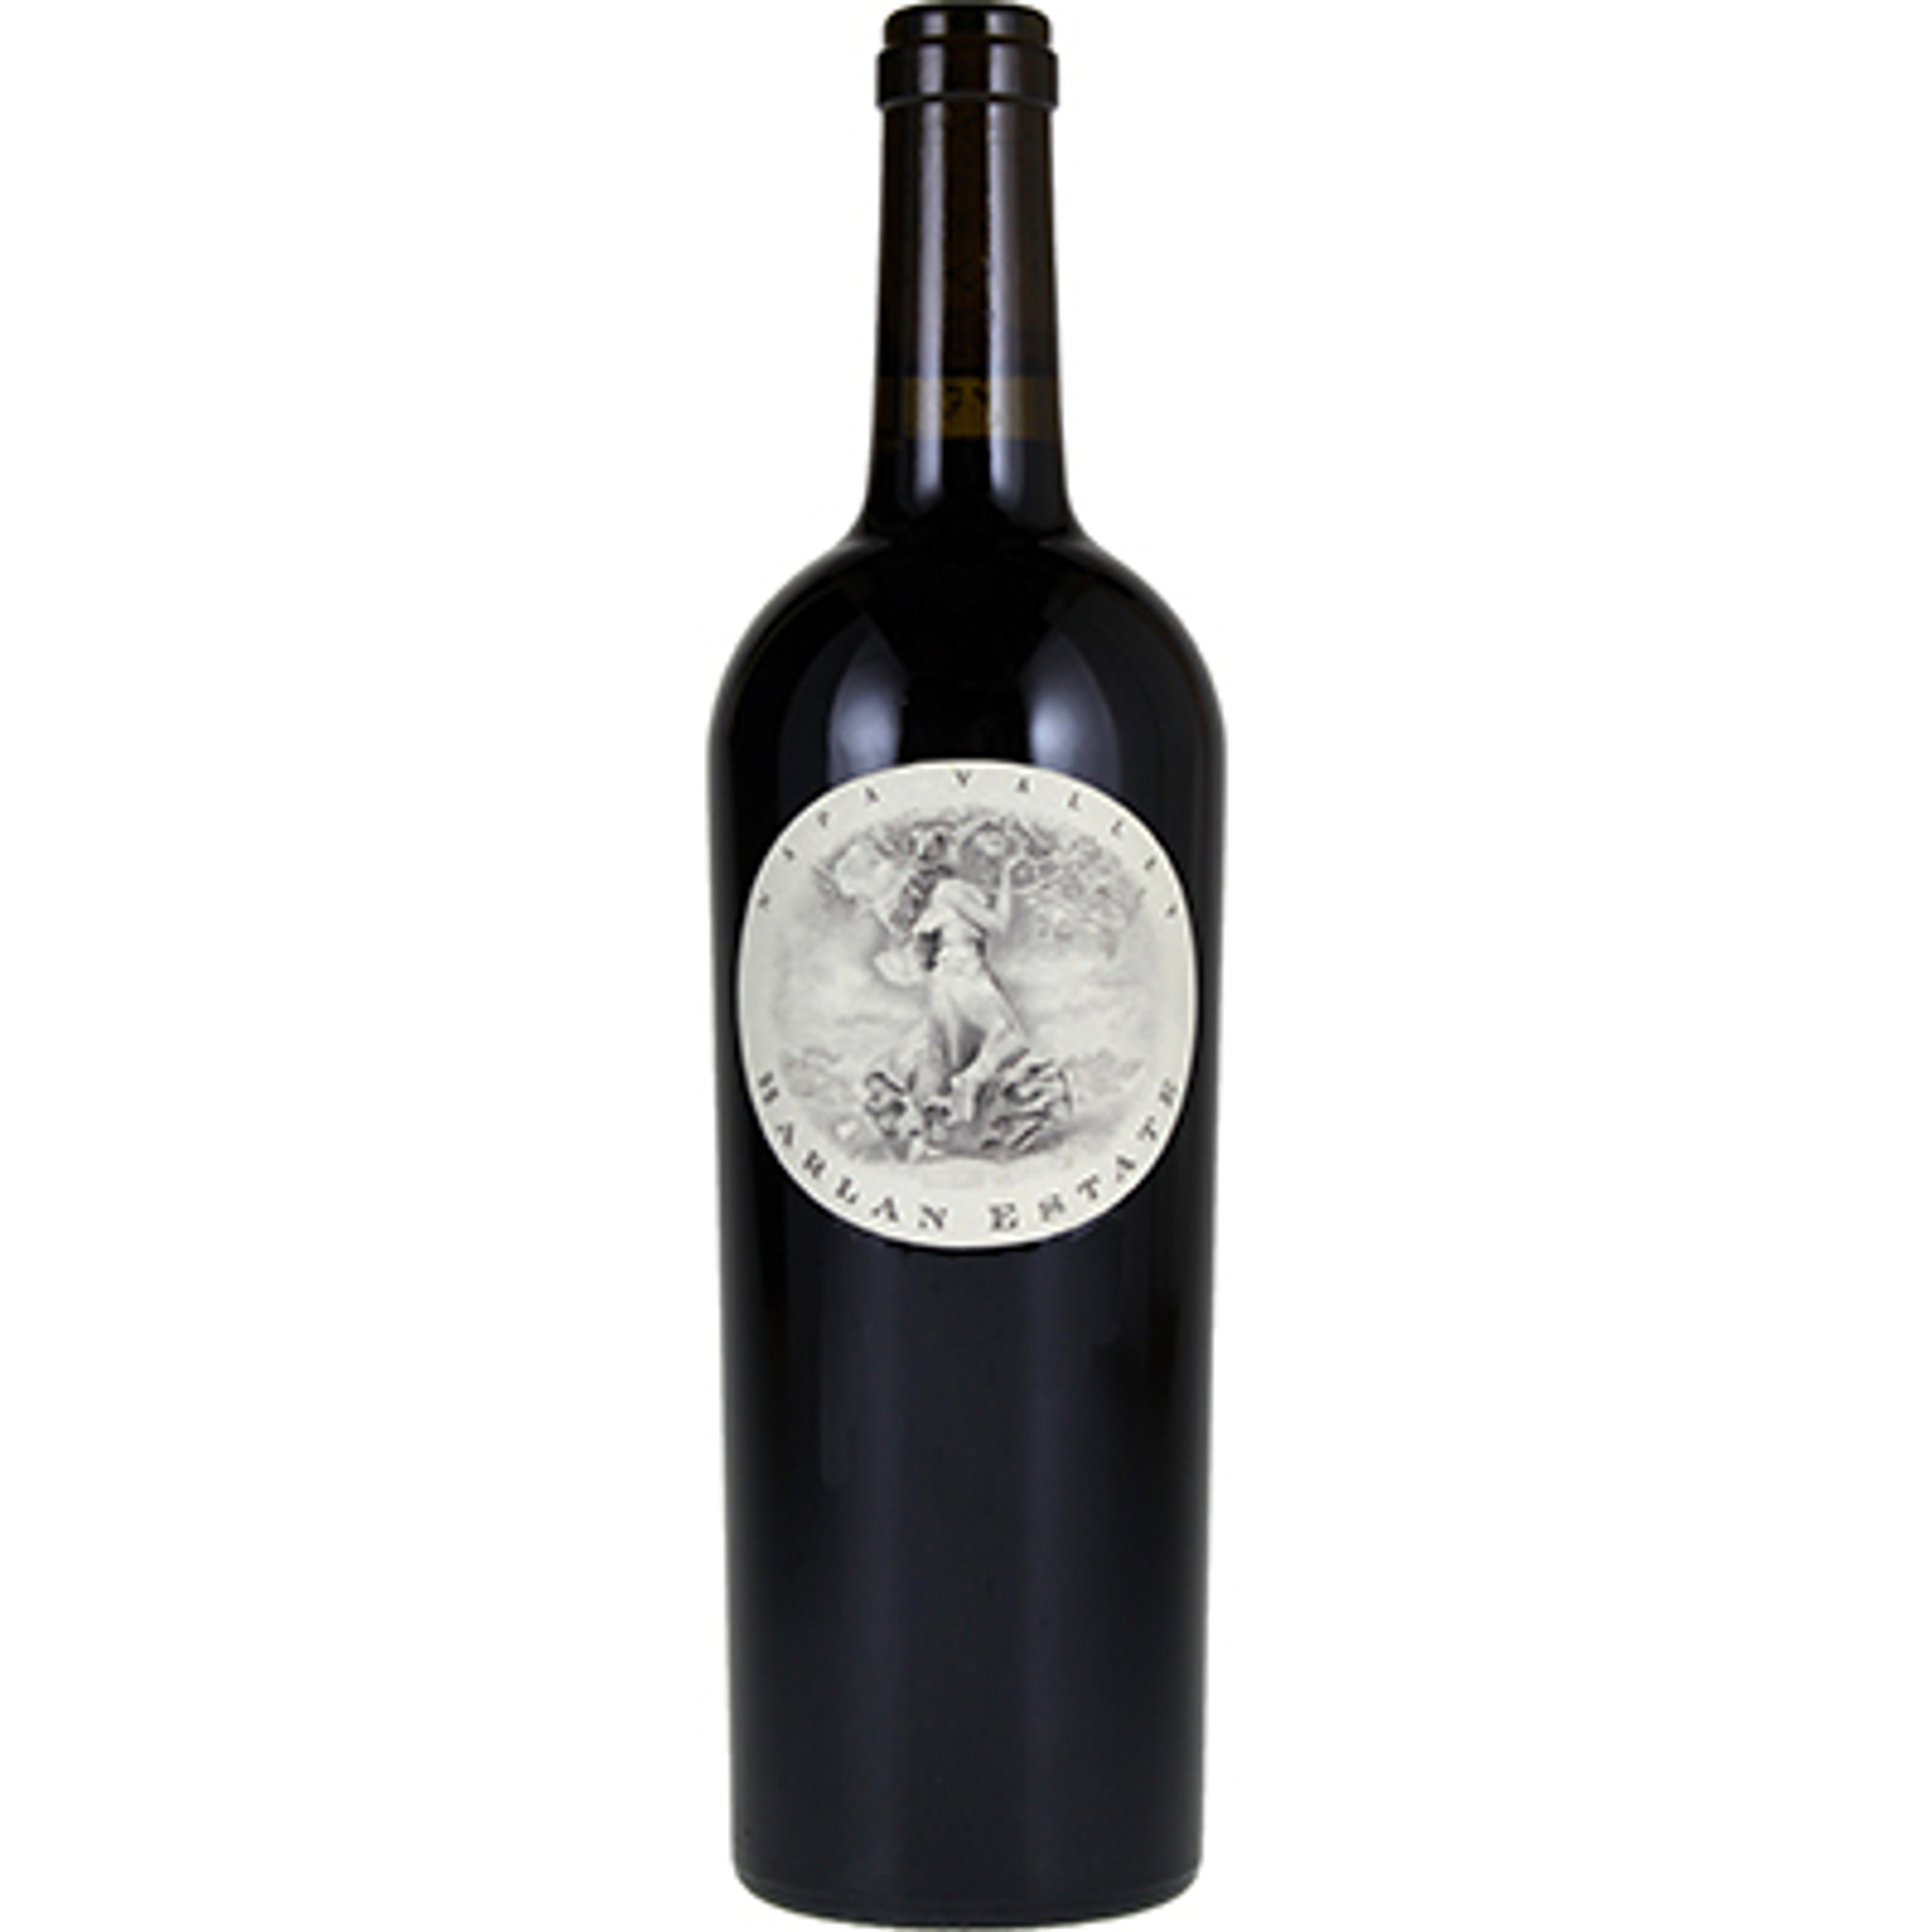 Harlan Estate Napa Valley Proprietary Red 2013 The House Of Glunz